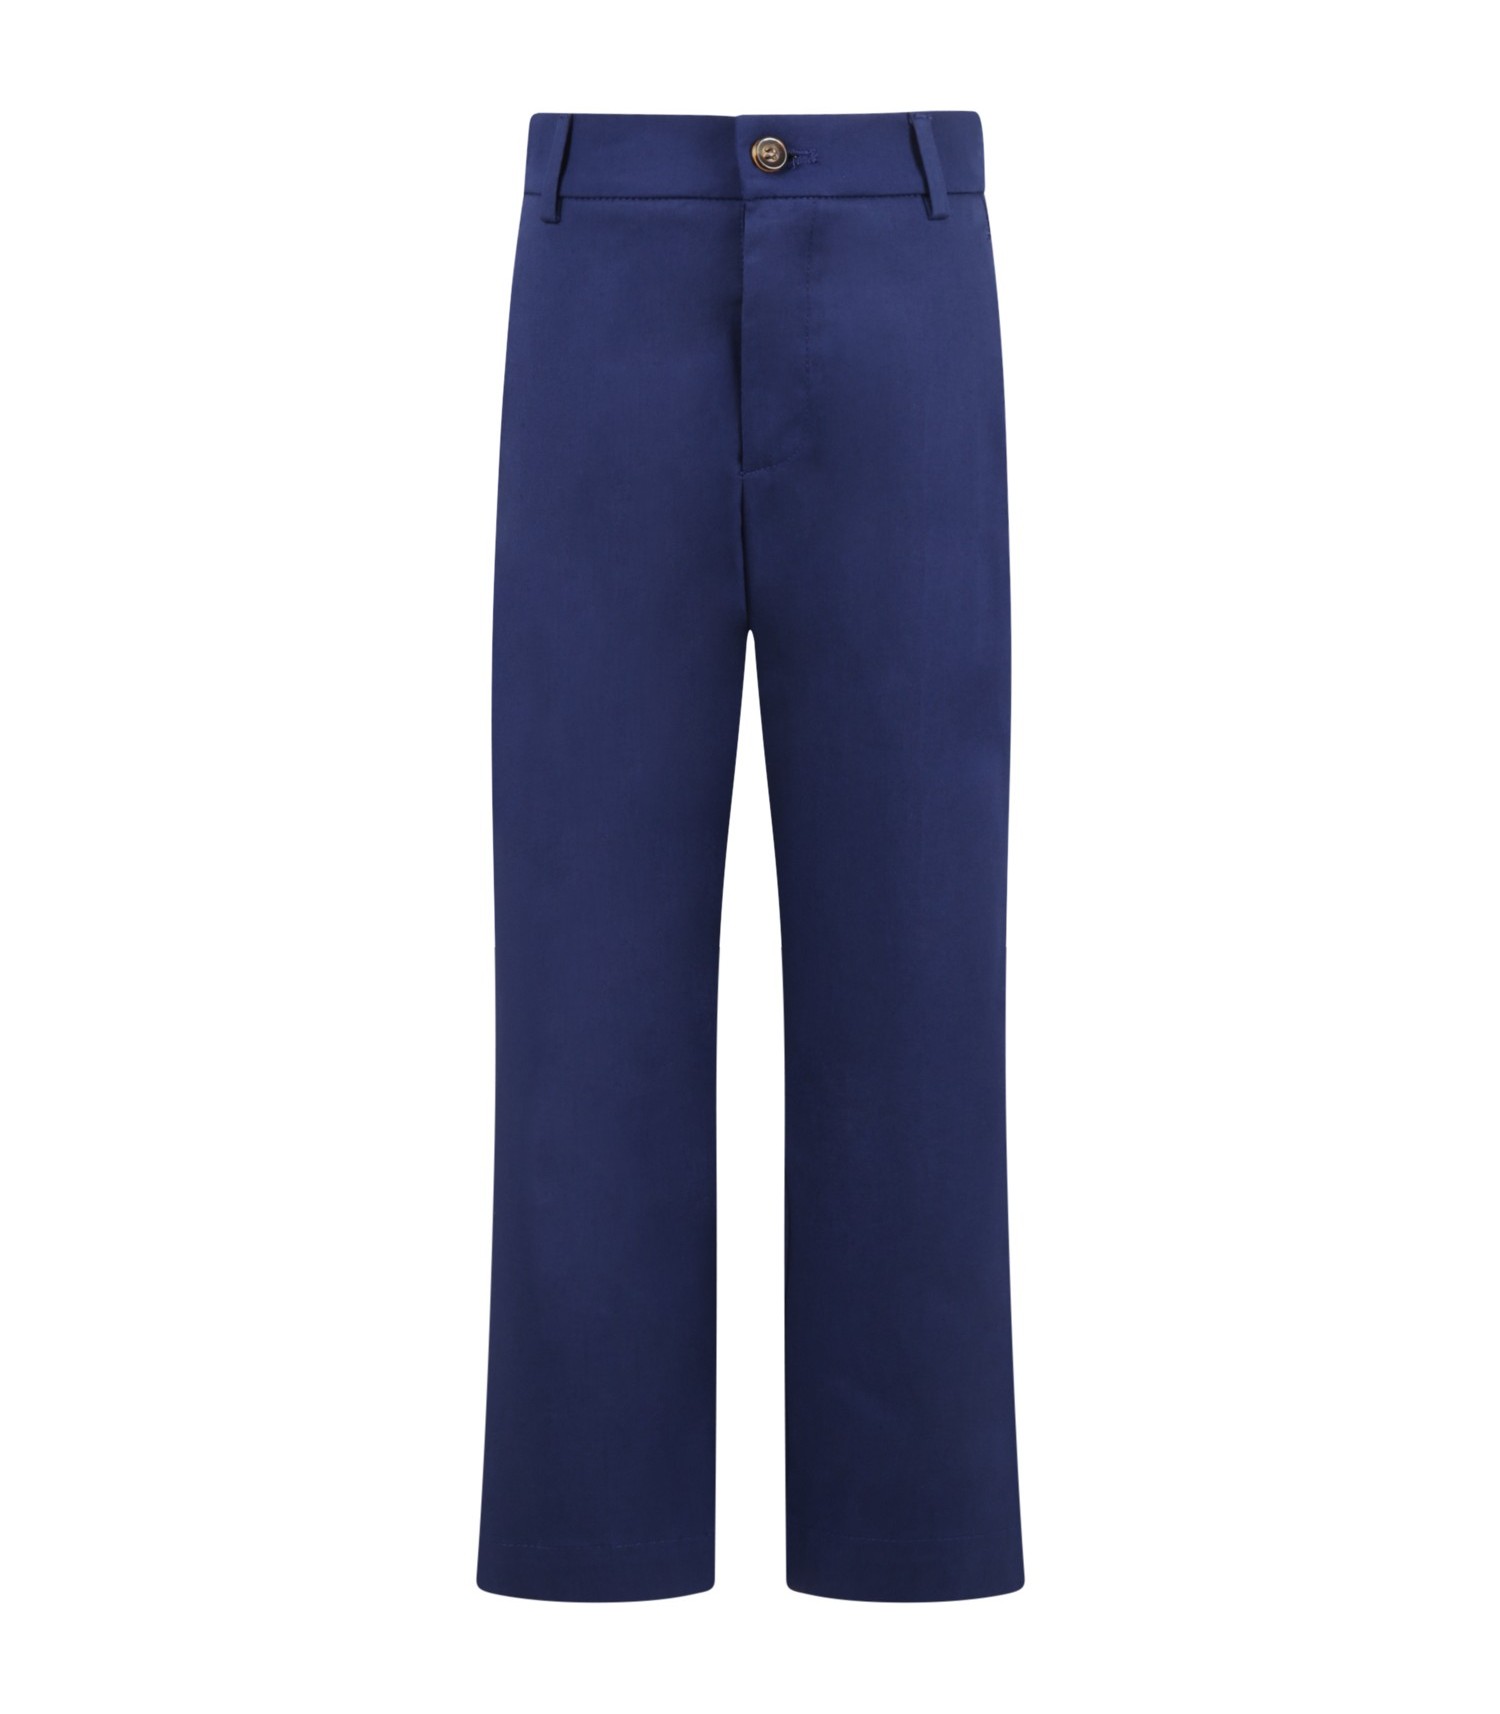 Fendi Kids Blue trousers for boy with iconic FF